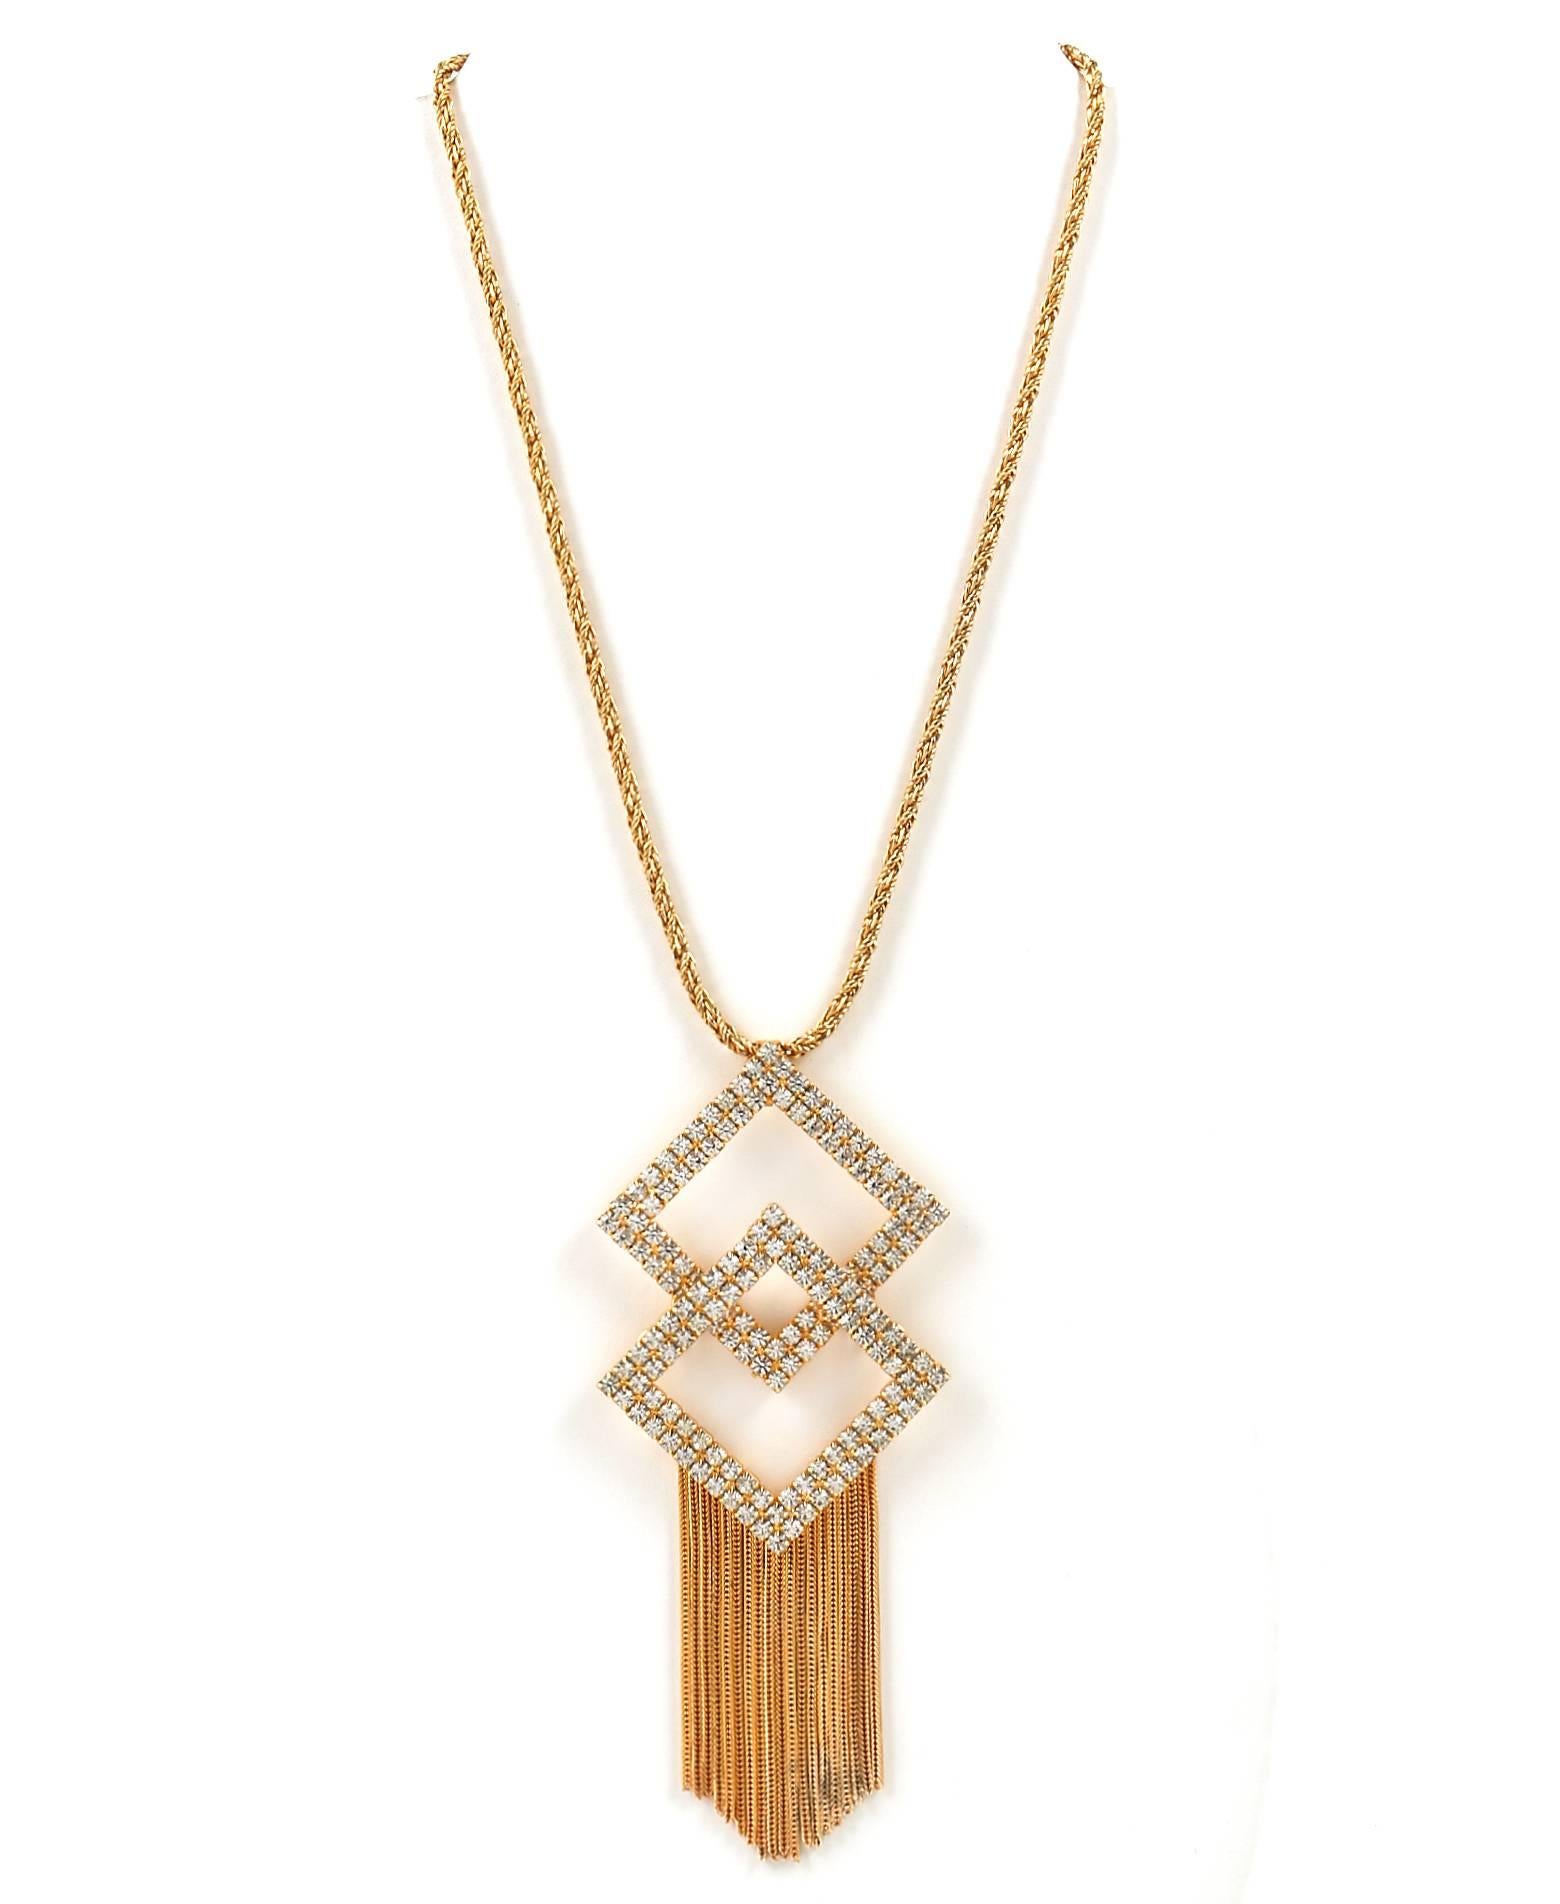 Vintage c.1960's Hobe crystal geometric statement pendant with gold-tone chain tassels and rope chain. Two large overlapped cut out diamond shaped pendants have two rows of prong set round clear crystals. Several fine gold tone chain tassels hang